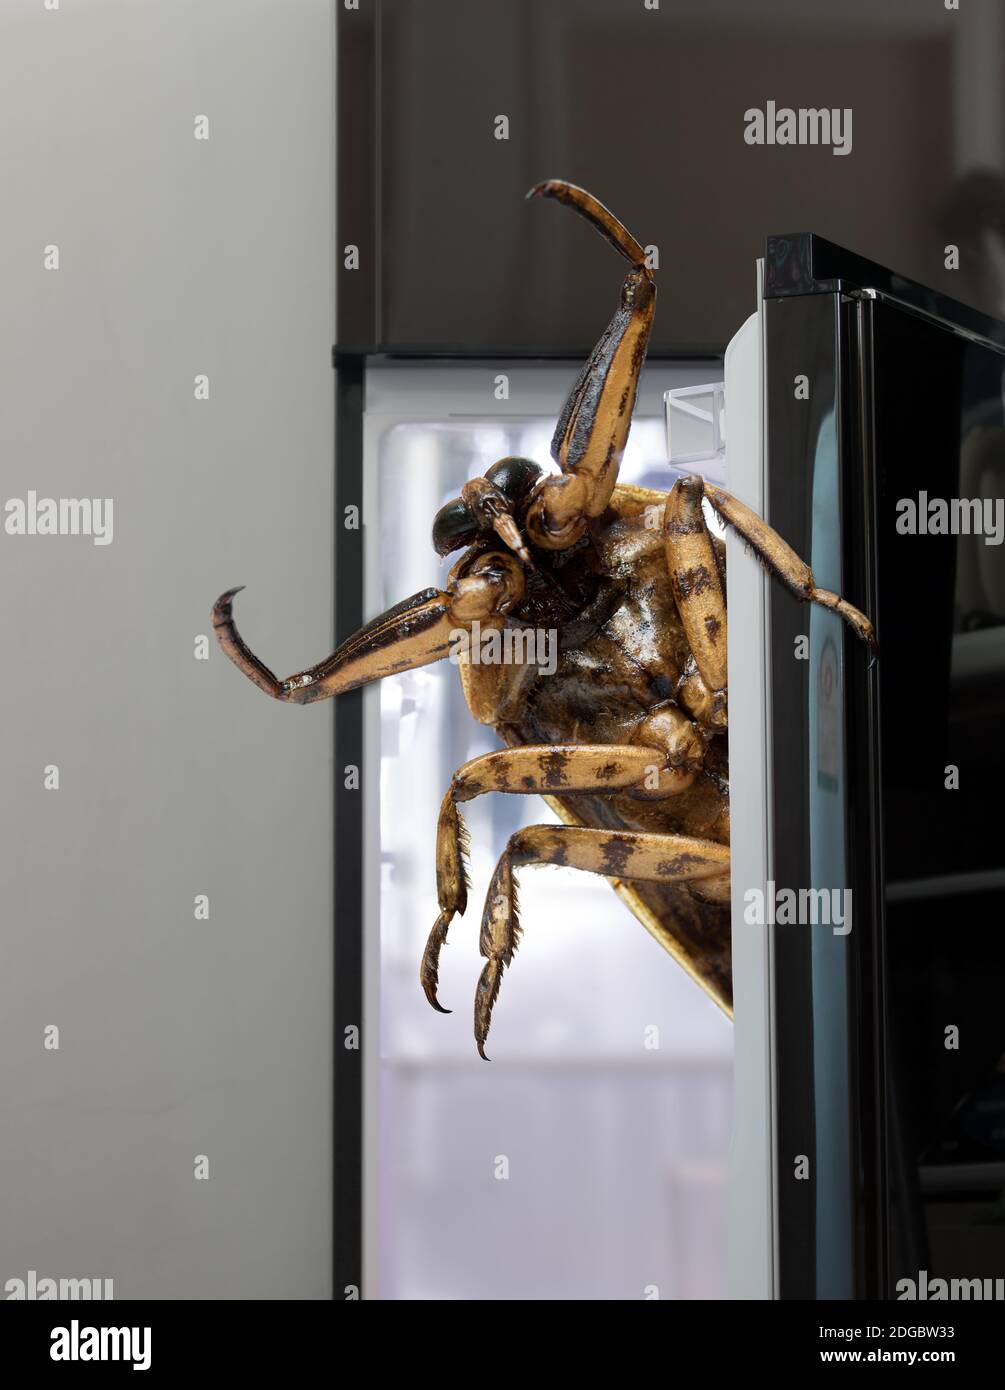 A giant fried Giant Water Bug - Lethocerus indicus peeks out of an open refrigerator door. Stock Photo